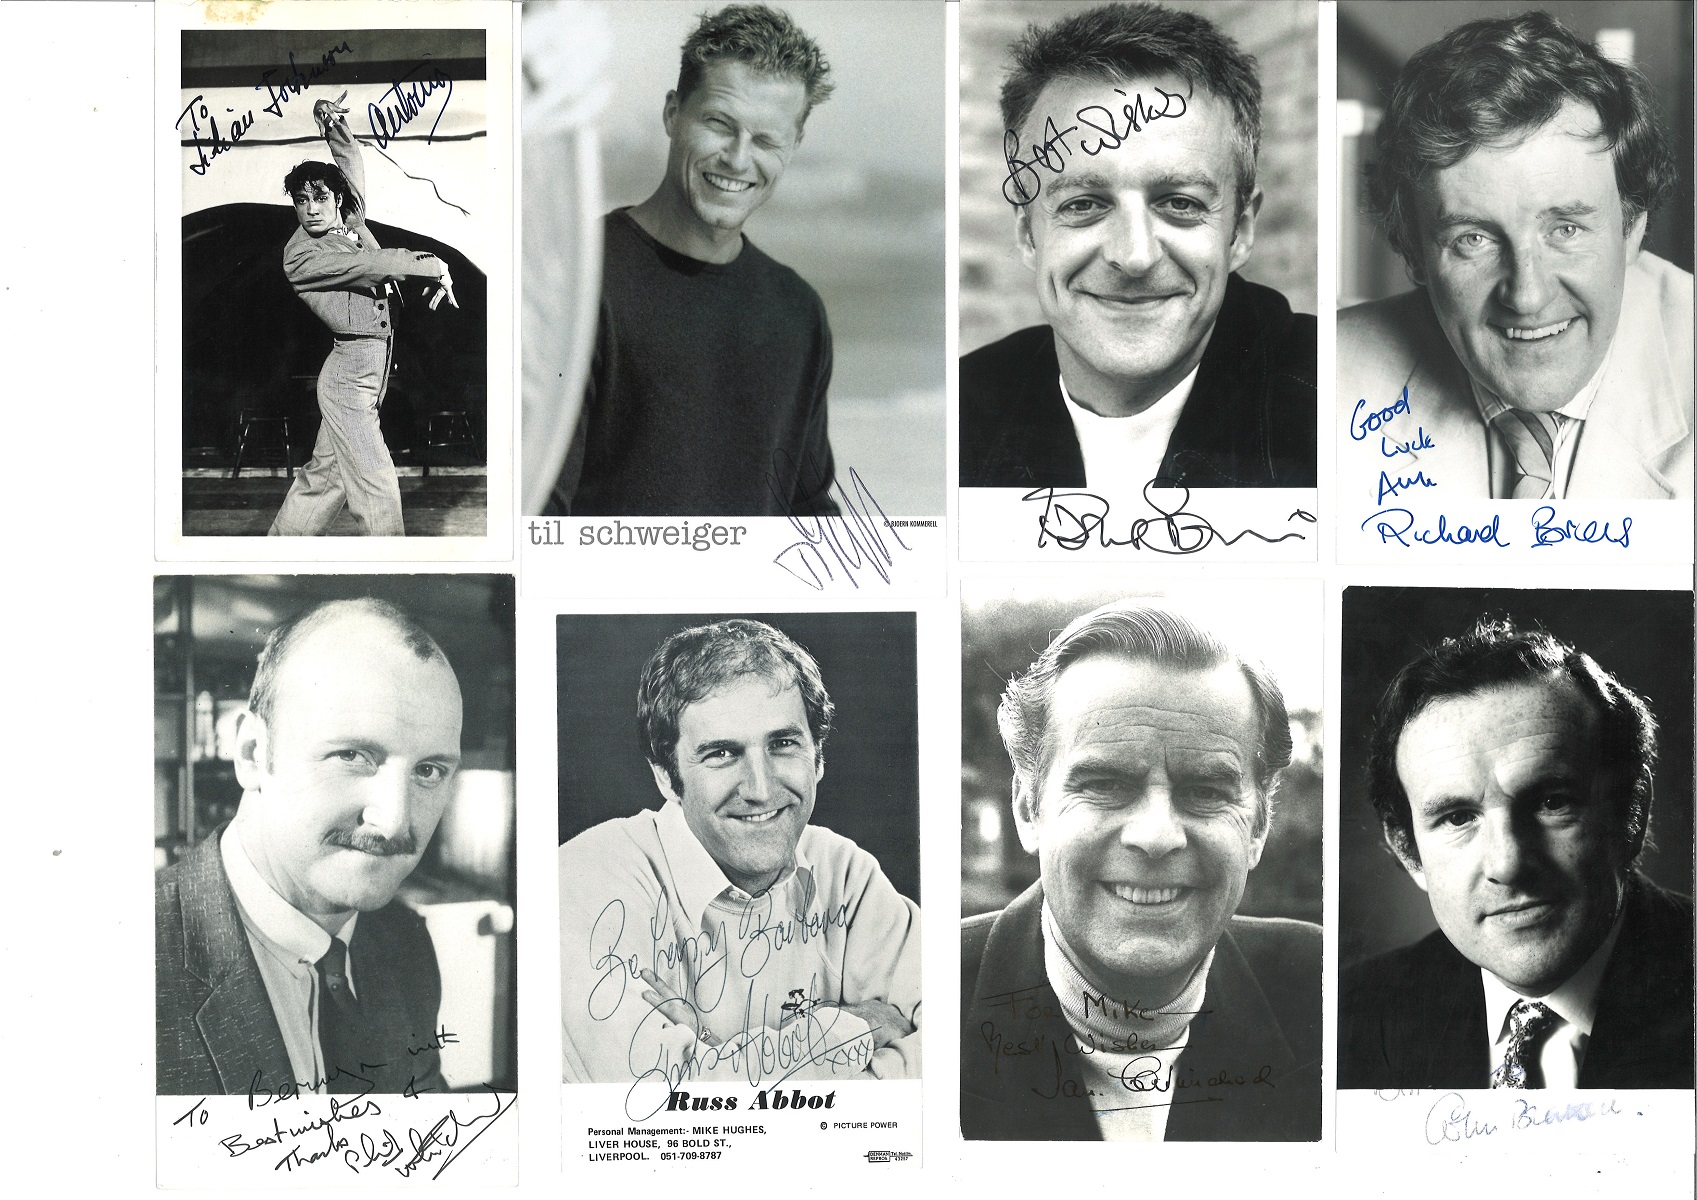 TV male signed collection of 20+ signatures on mainly 6x4 size photos. Some of names included are